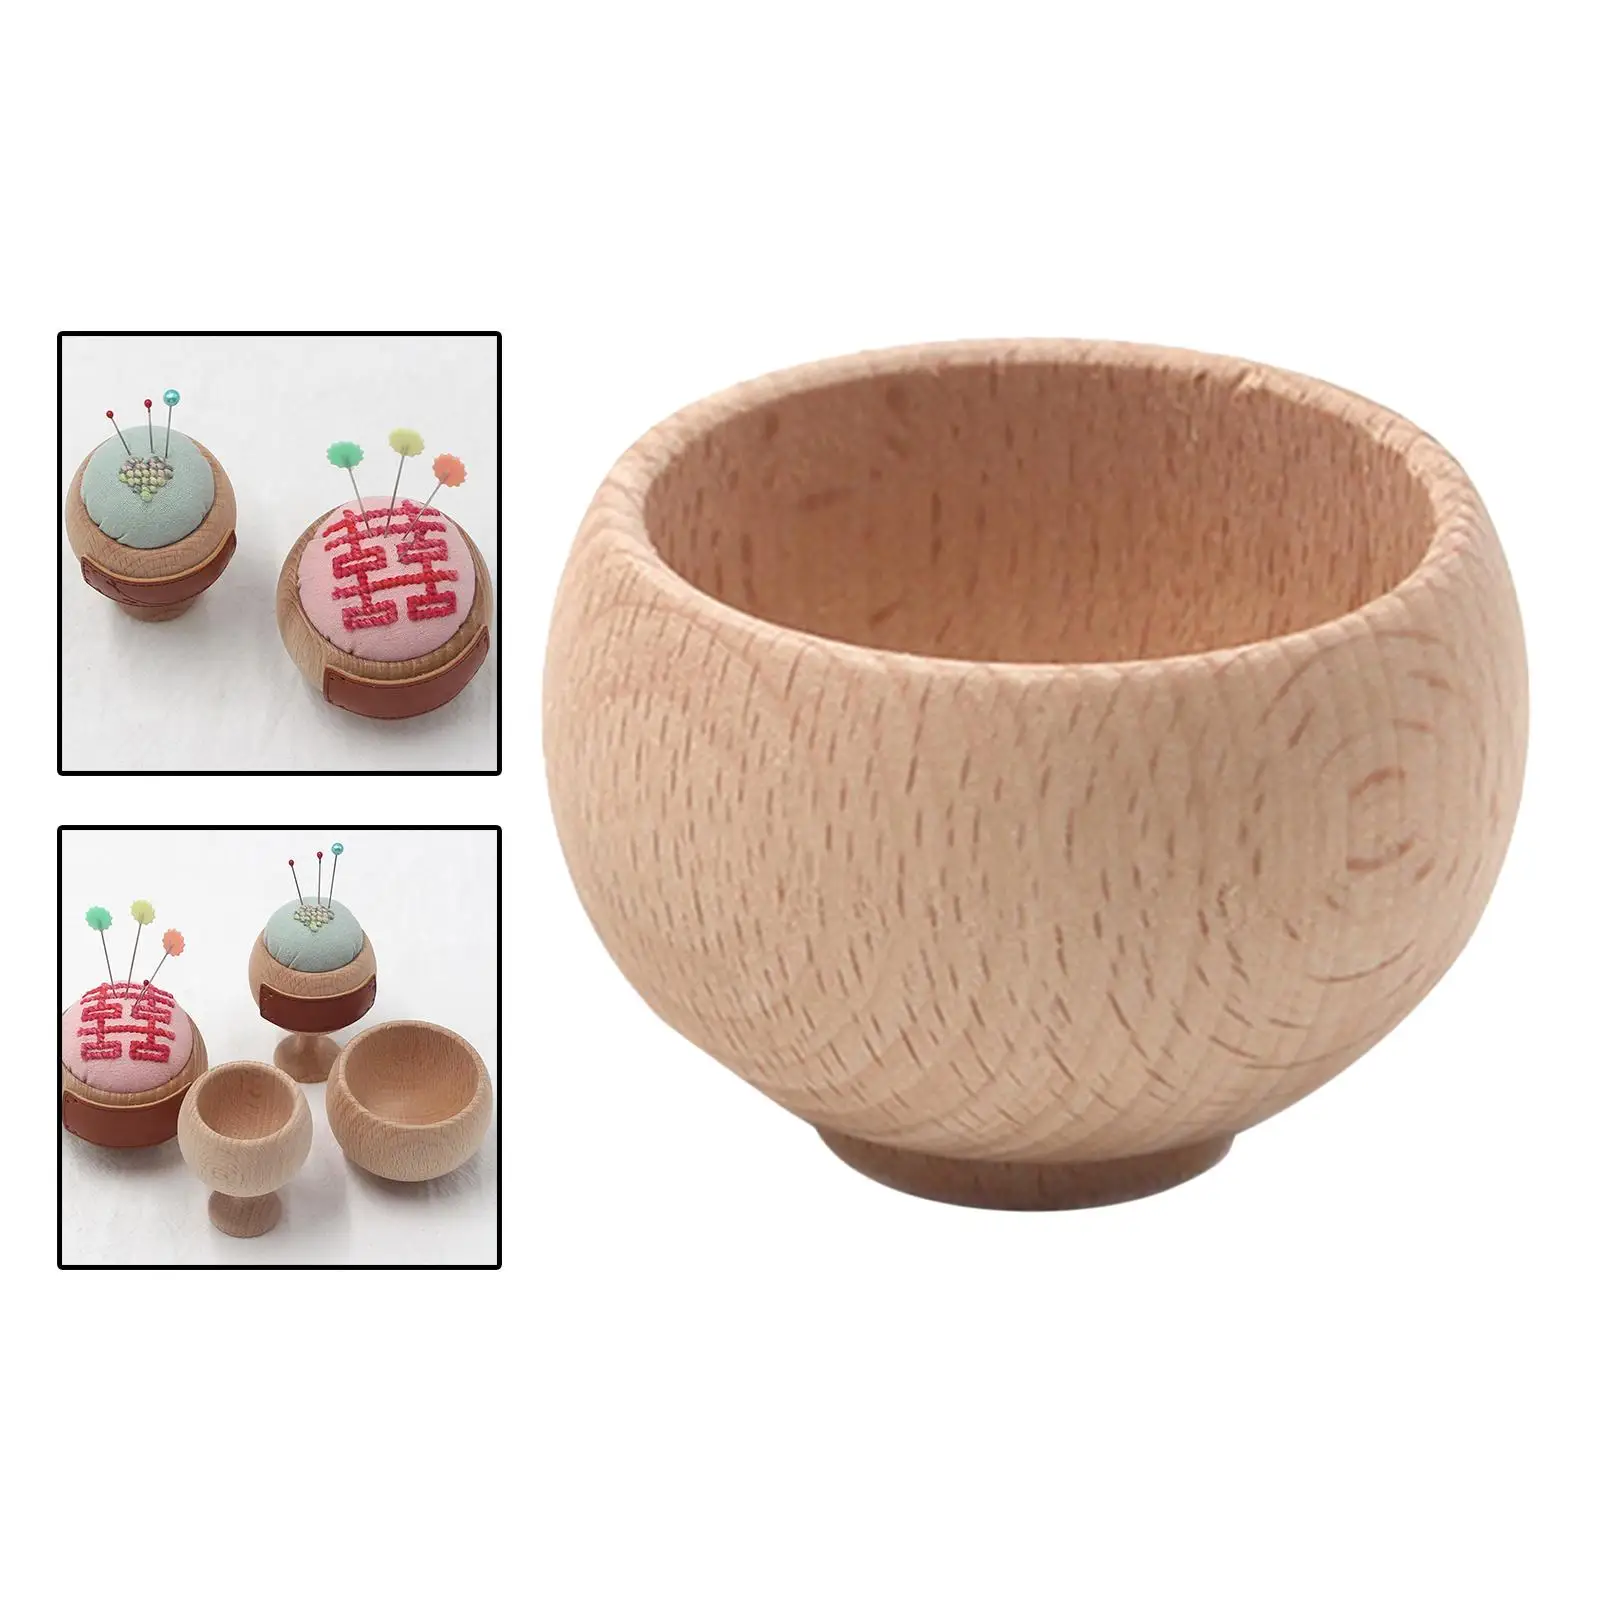 Sewing Holder DIY Holder Accessory Wooden Bowl Pin Pillow Handcraft